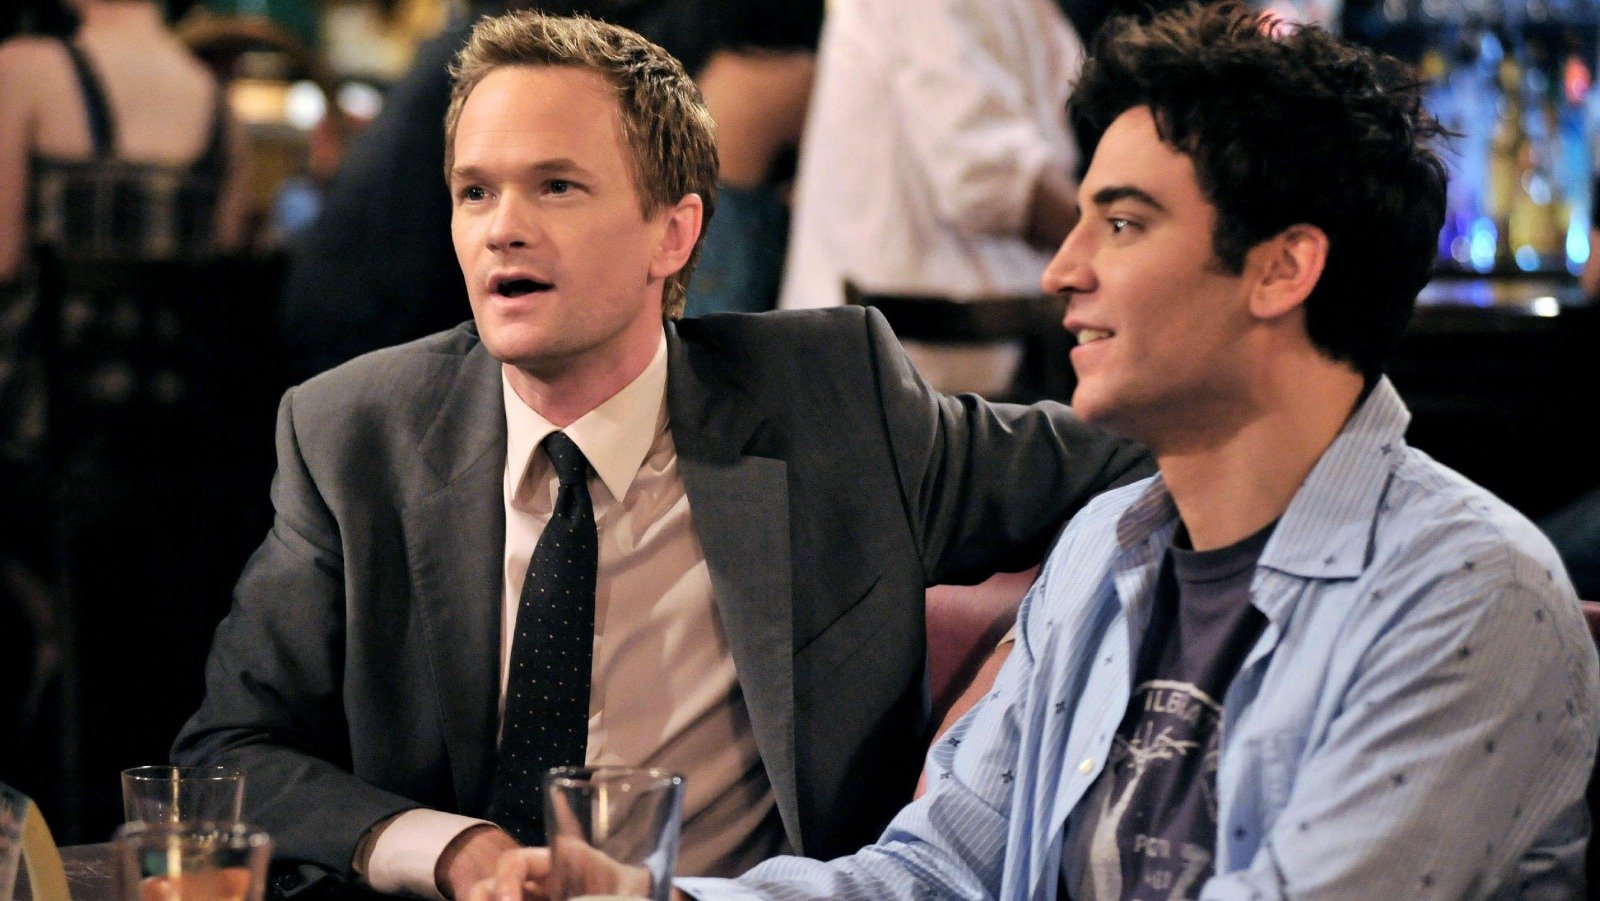 The True Story Behind How I Met Your Mother's Most Quotable Line